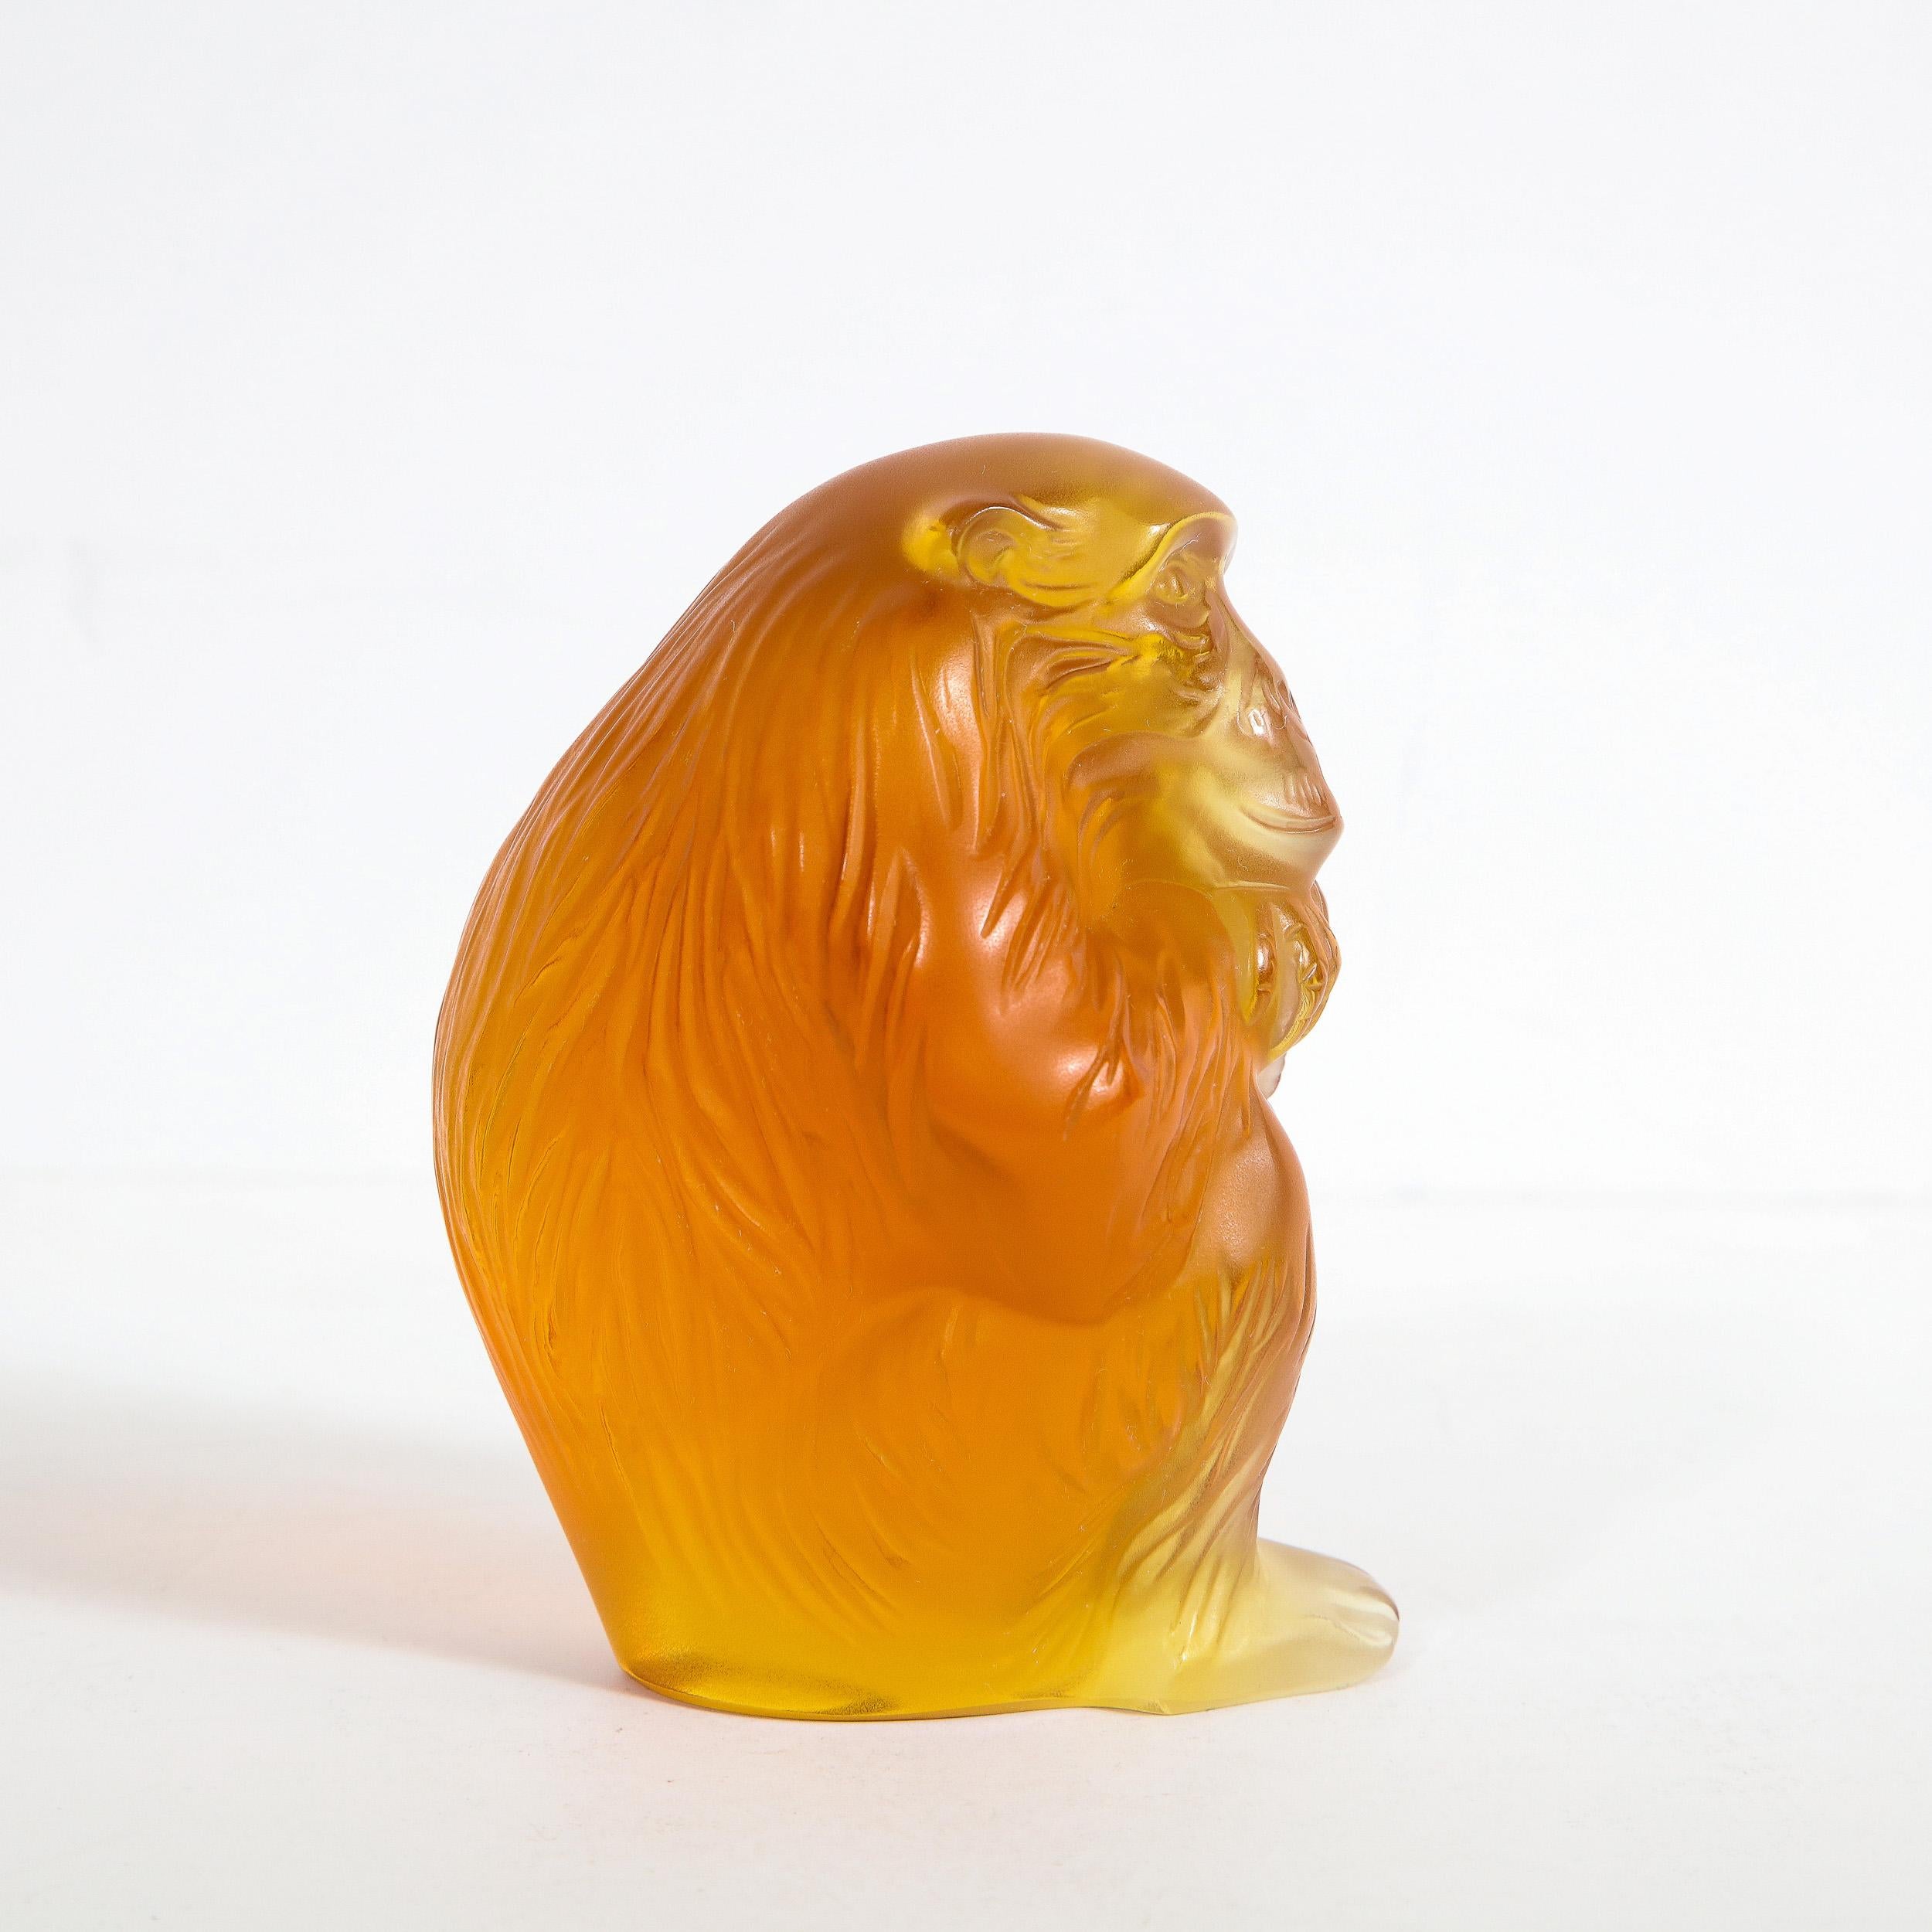 French Modernist Stylized Monkey Sculpture in Carnelian Glass Signed by Lalique